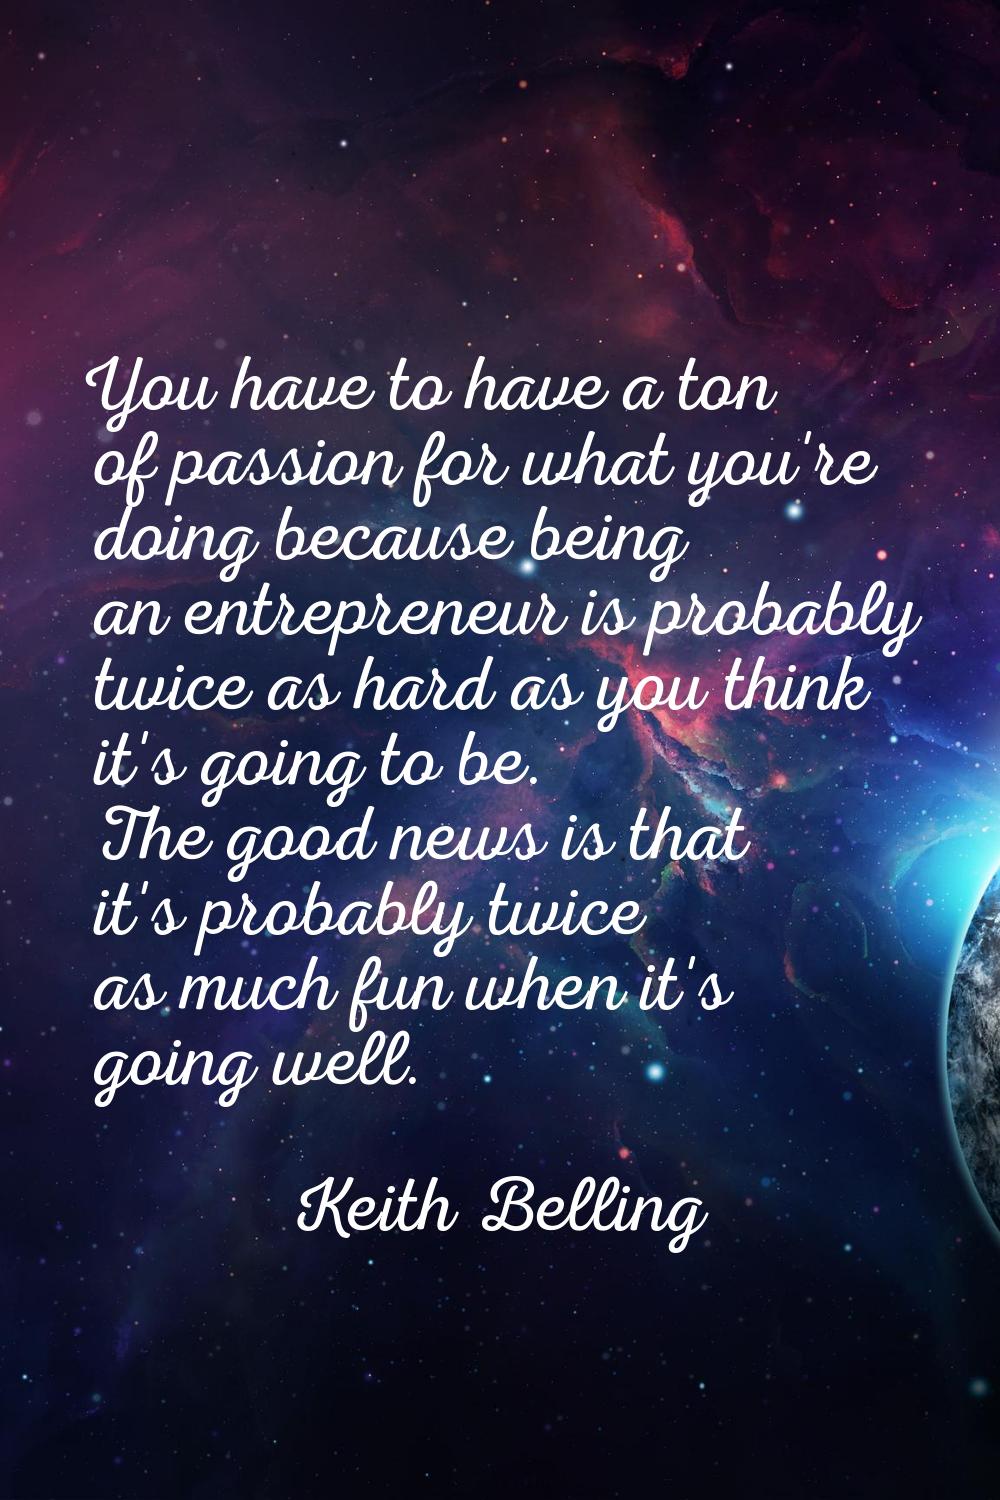 You have to have a ton of passion for what you're doing because being an entrepreneur is probably t